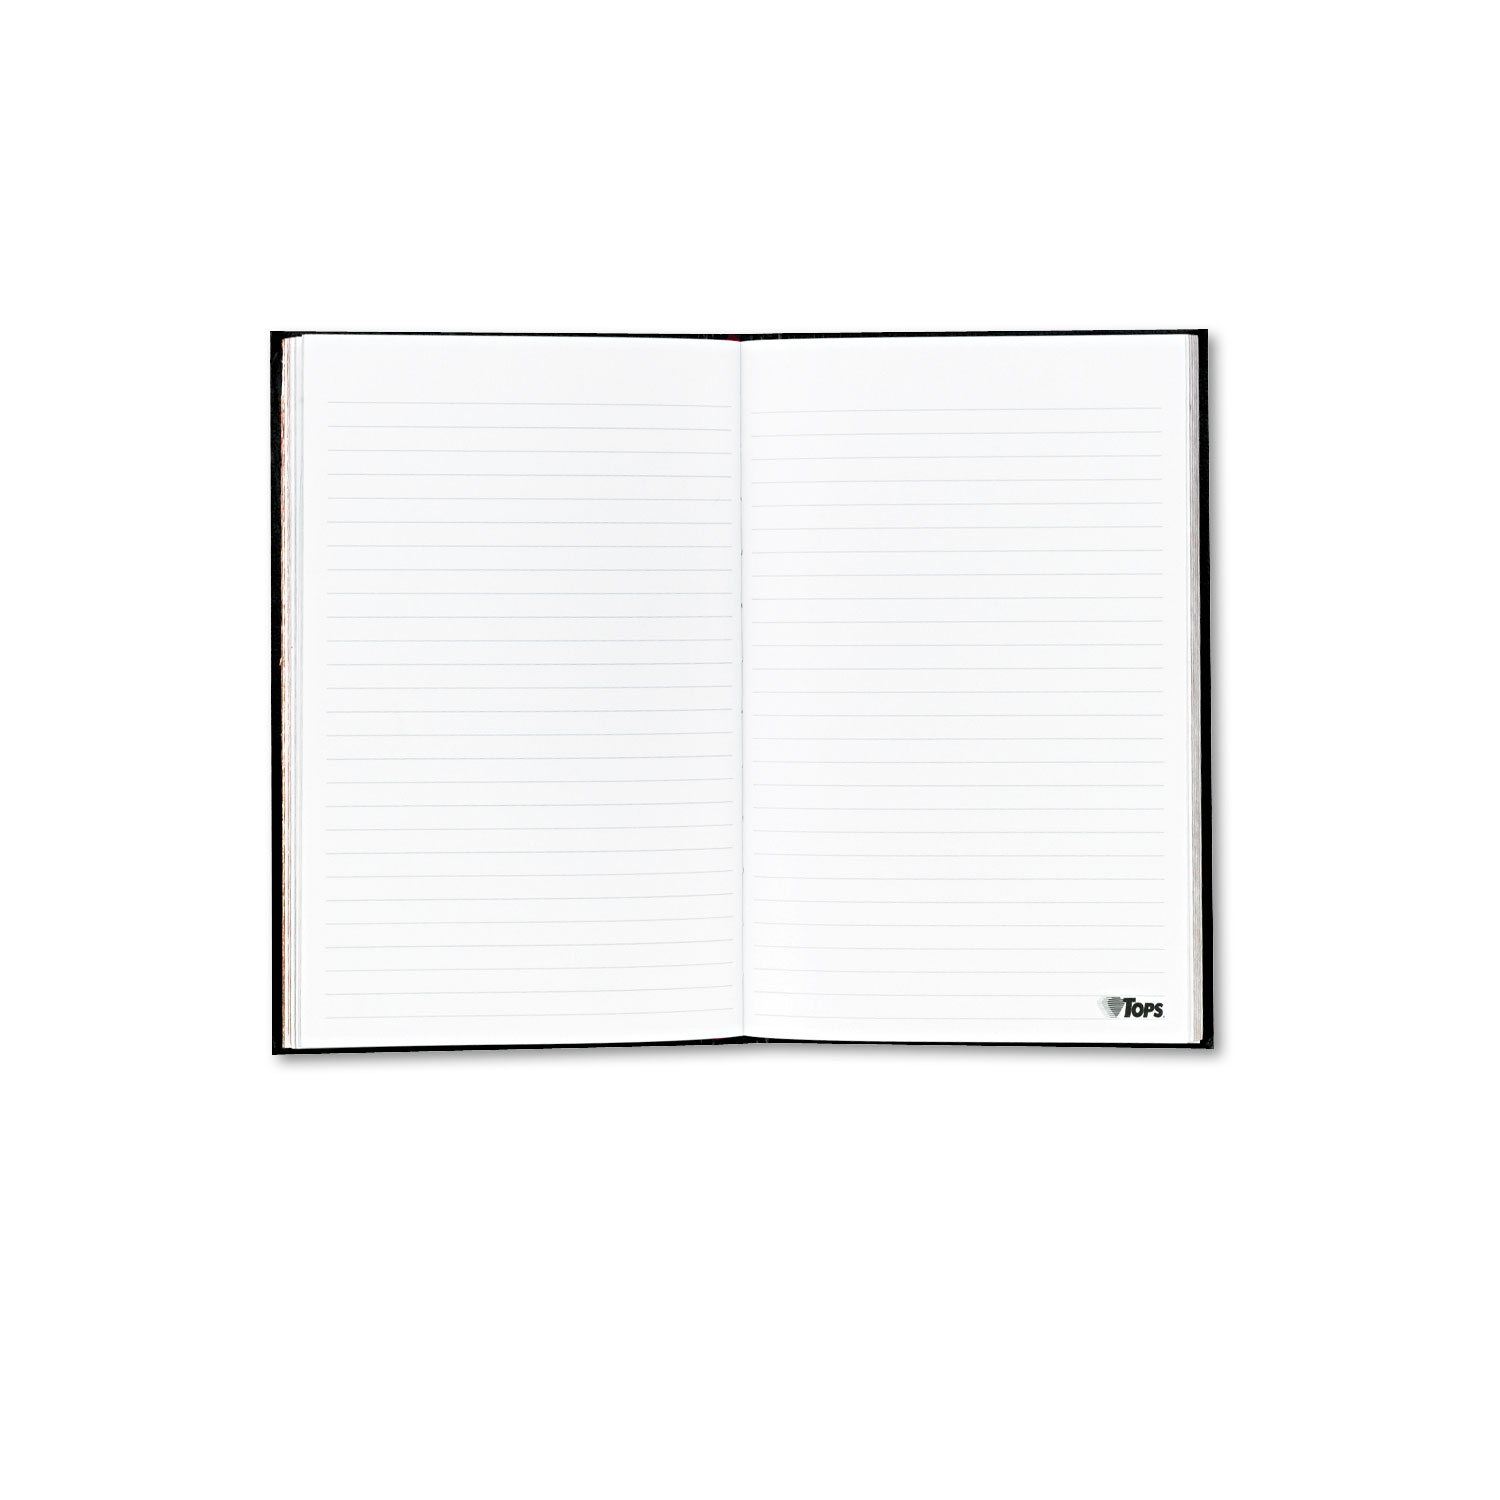  TOPS J25558 Professional Business Journal with Planning Pages, 160 Pages, 8 x 5, Black (TOPJ25558) 